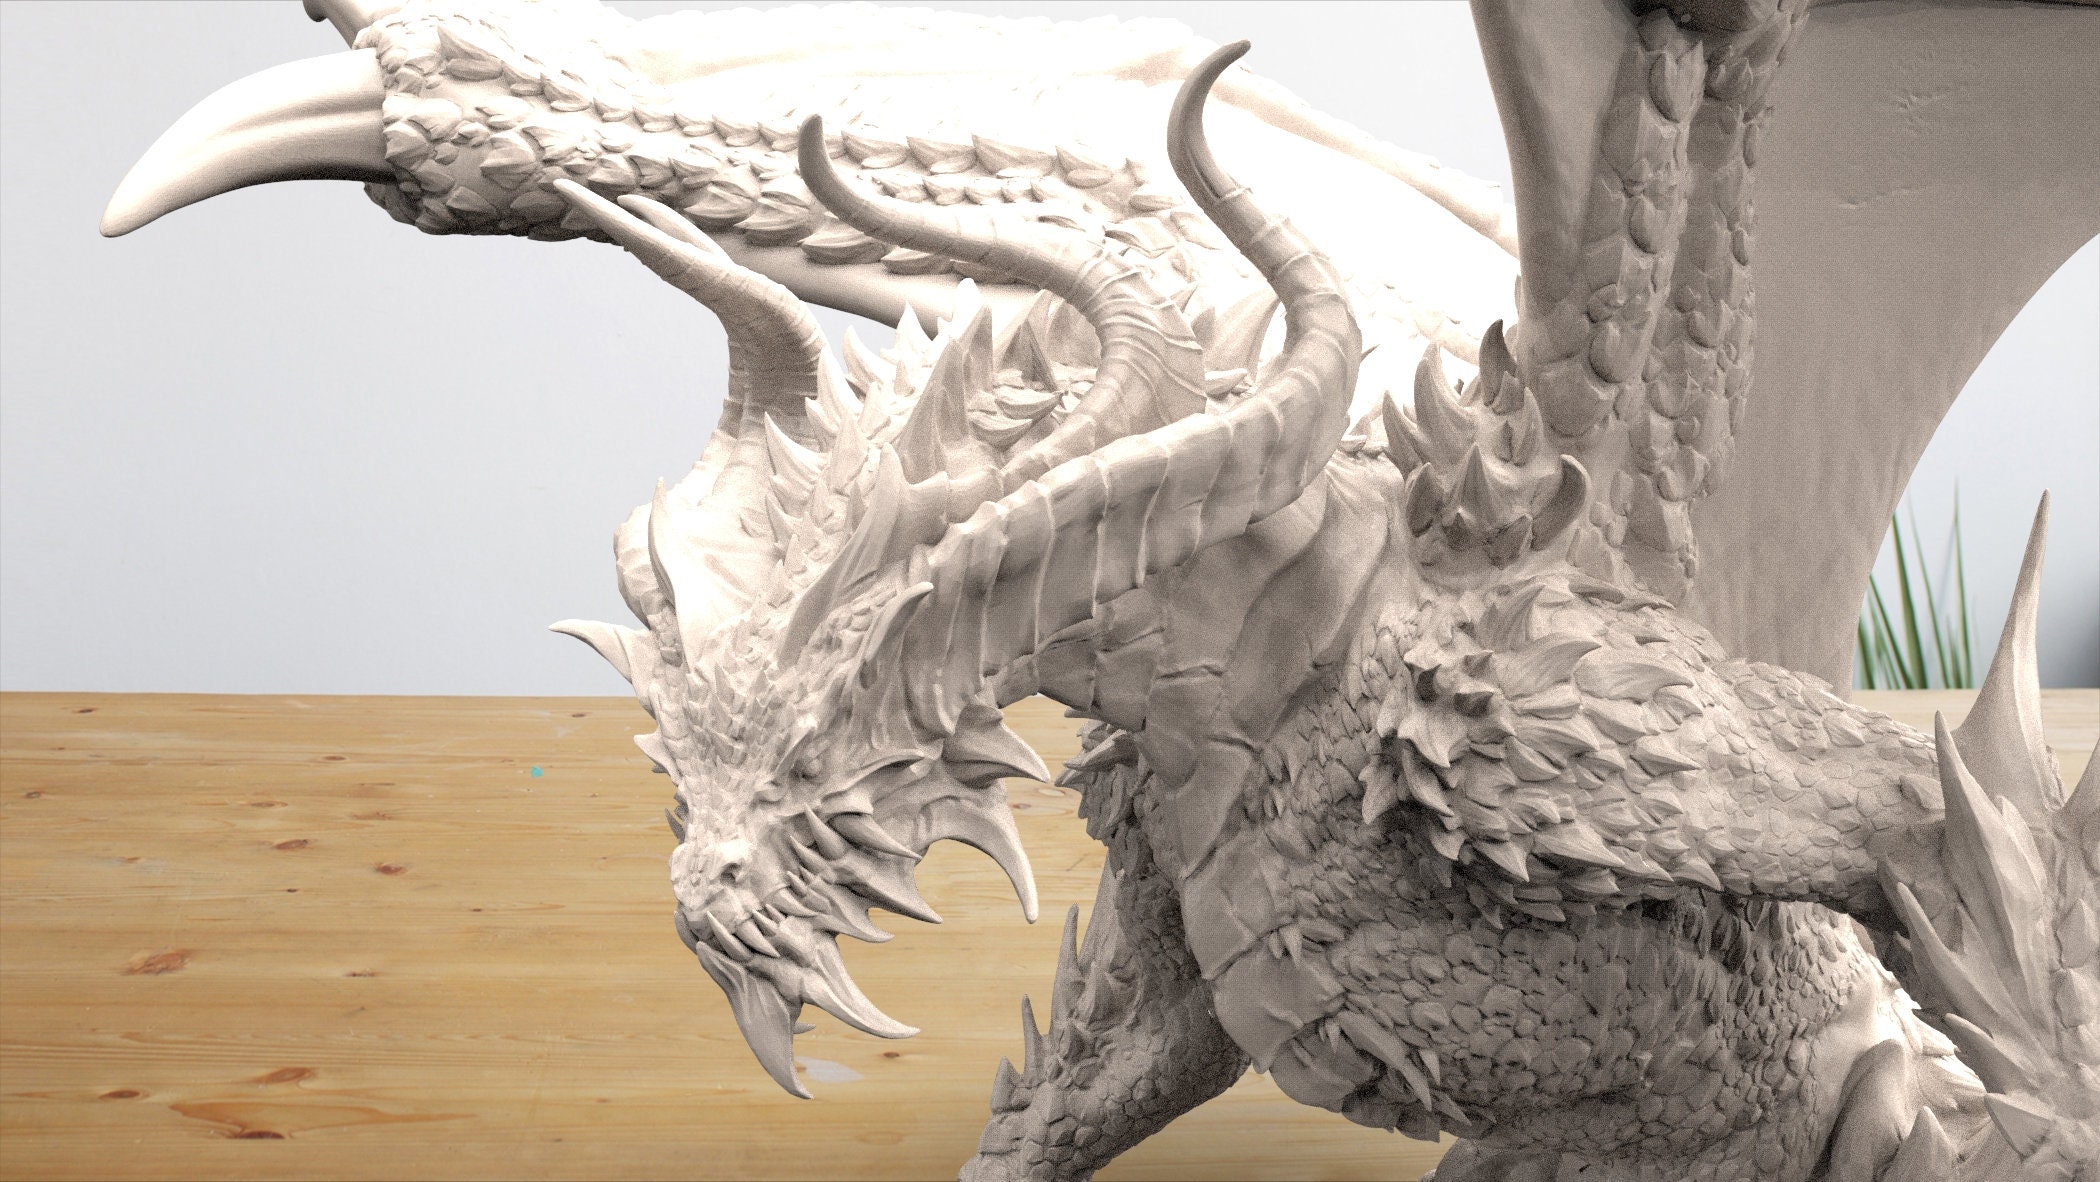 3D Printable Avatar of Bahamut – the Young Monk Grandmaster of Flowers -  32mm and 75mm scale by 2moronic miniatures